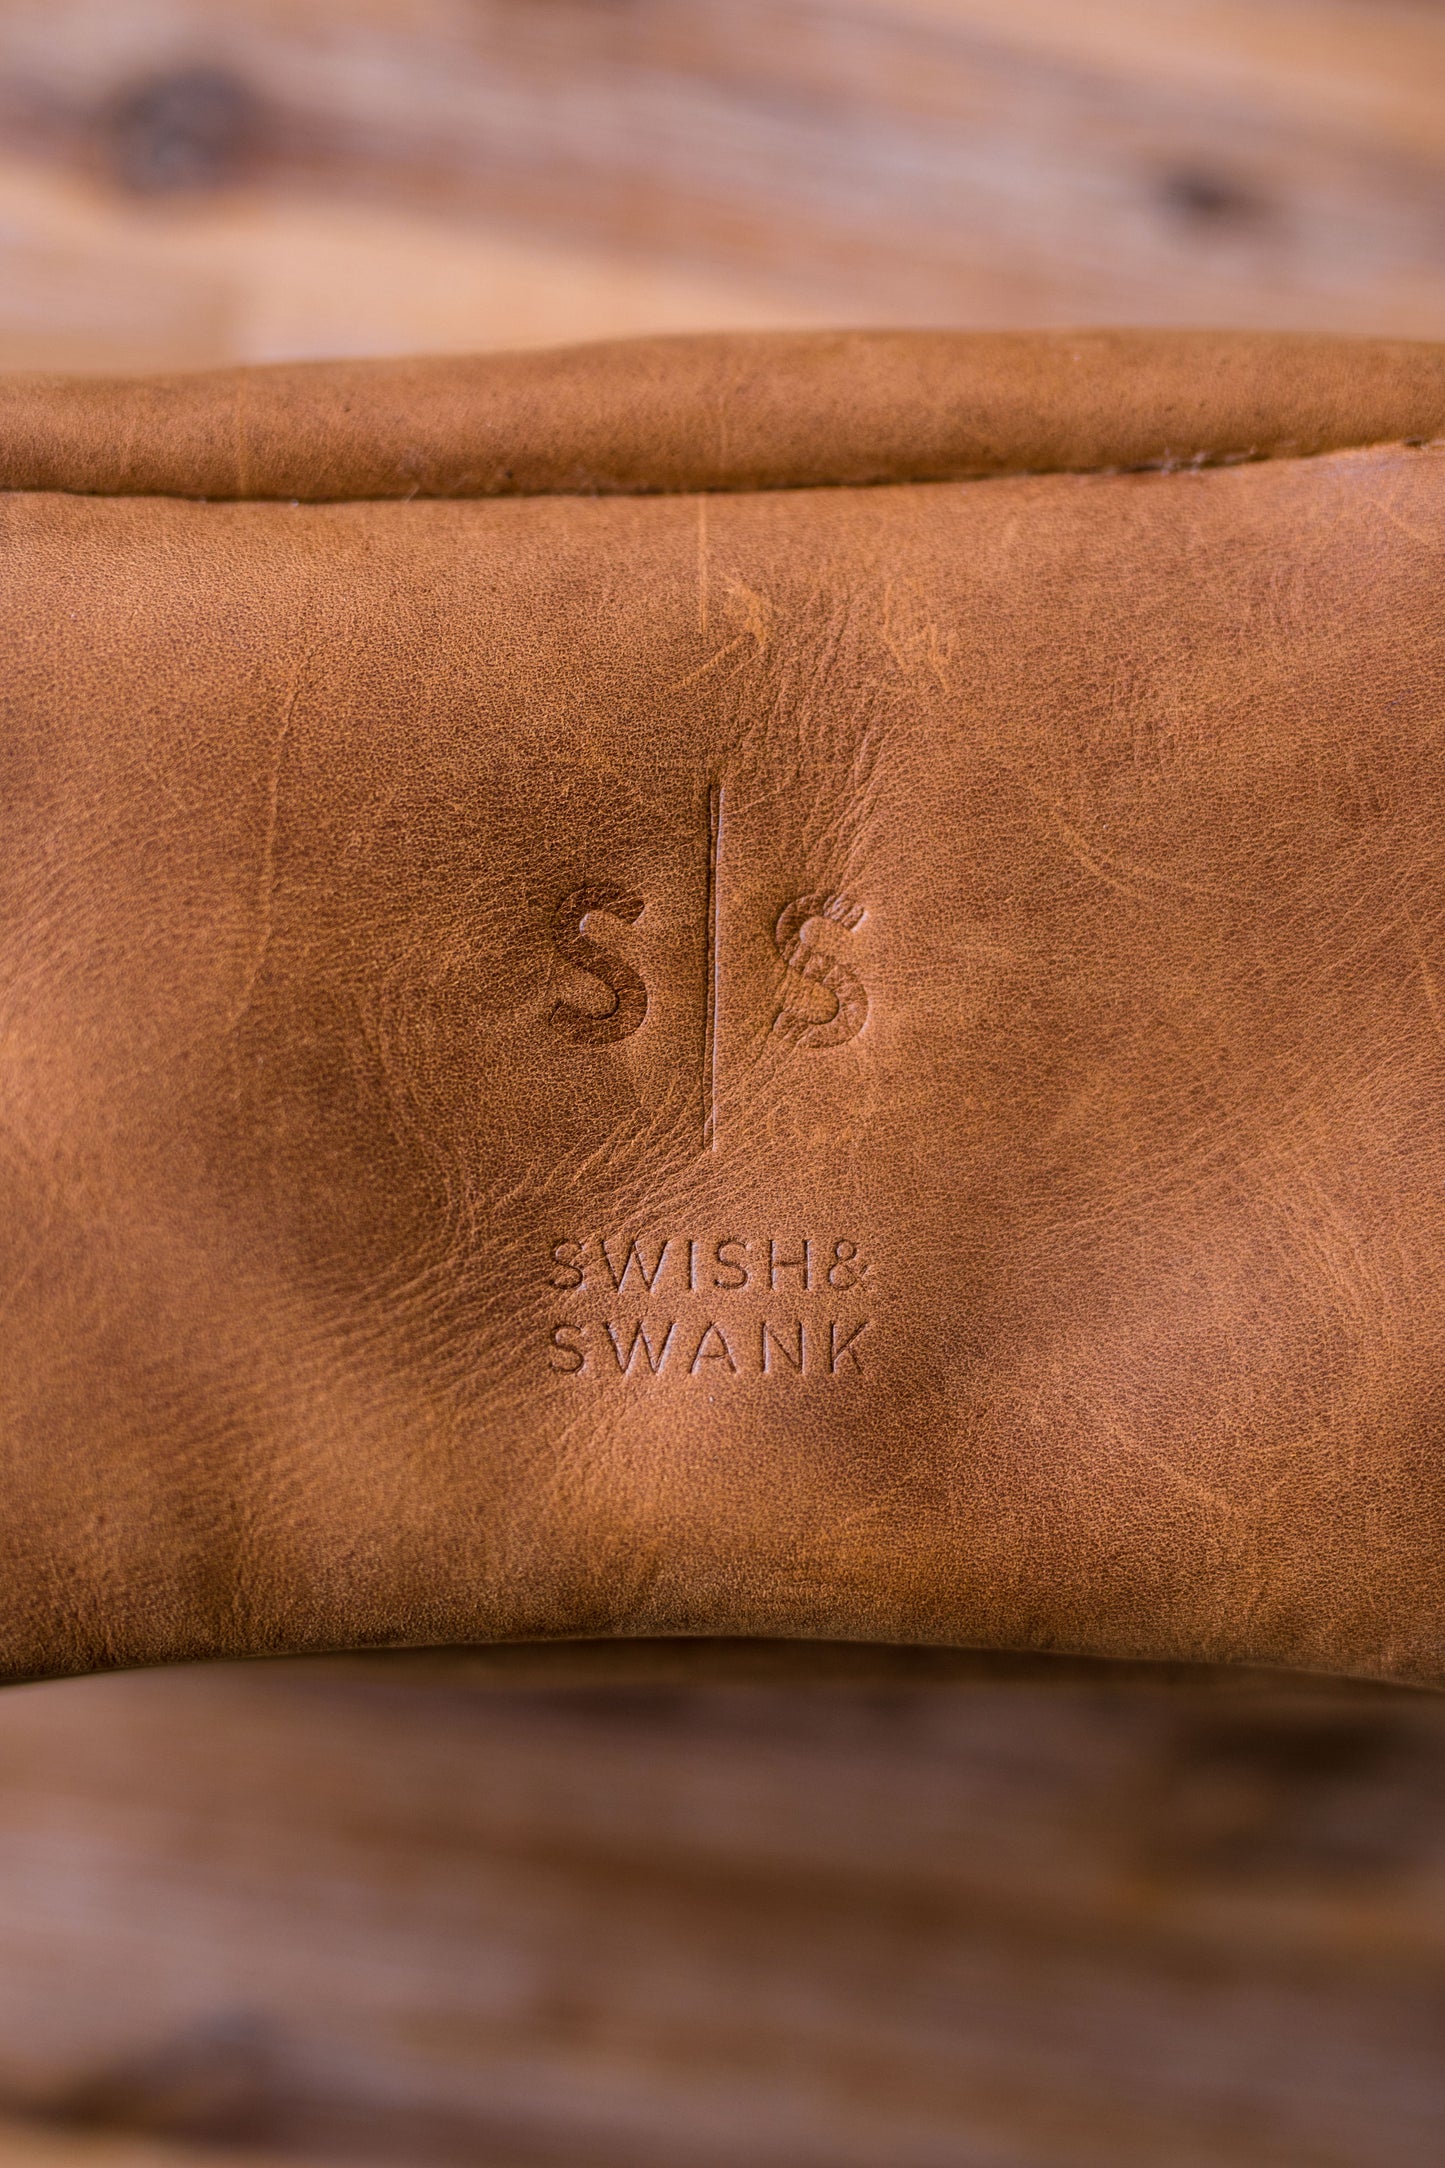 Unisex Genuine Leather Toiletry Bag Tan Edition.